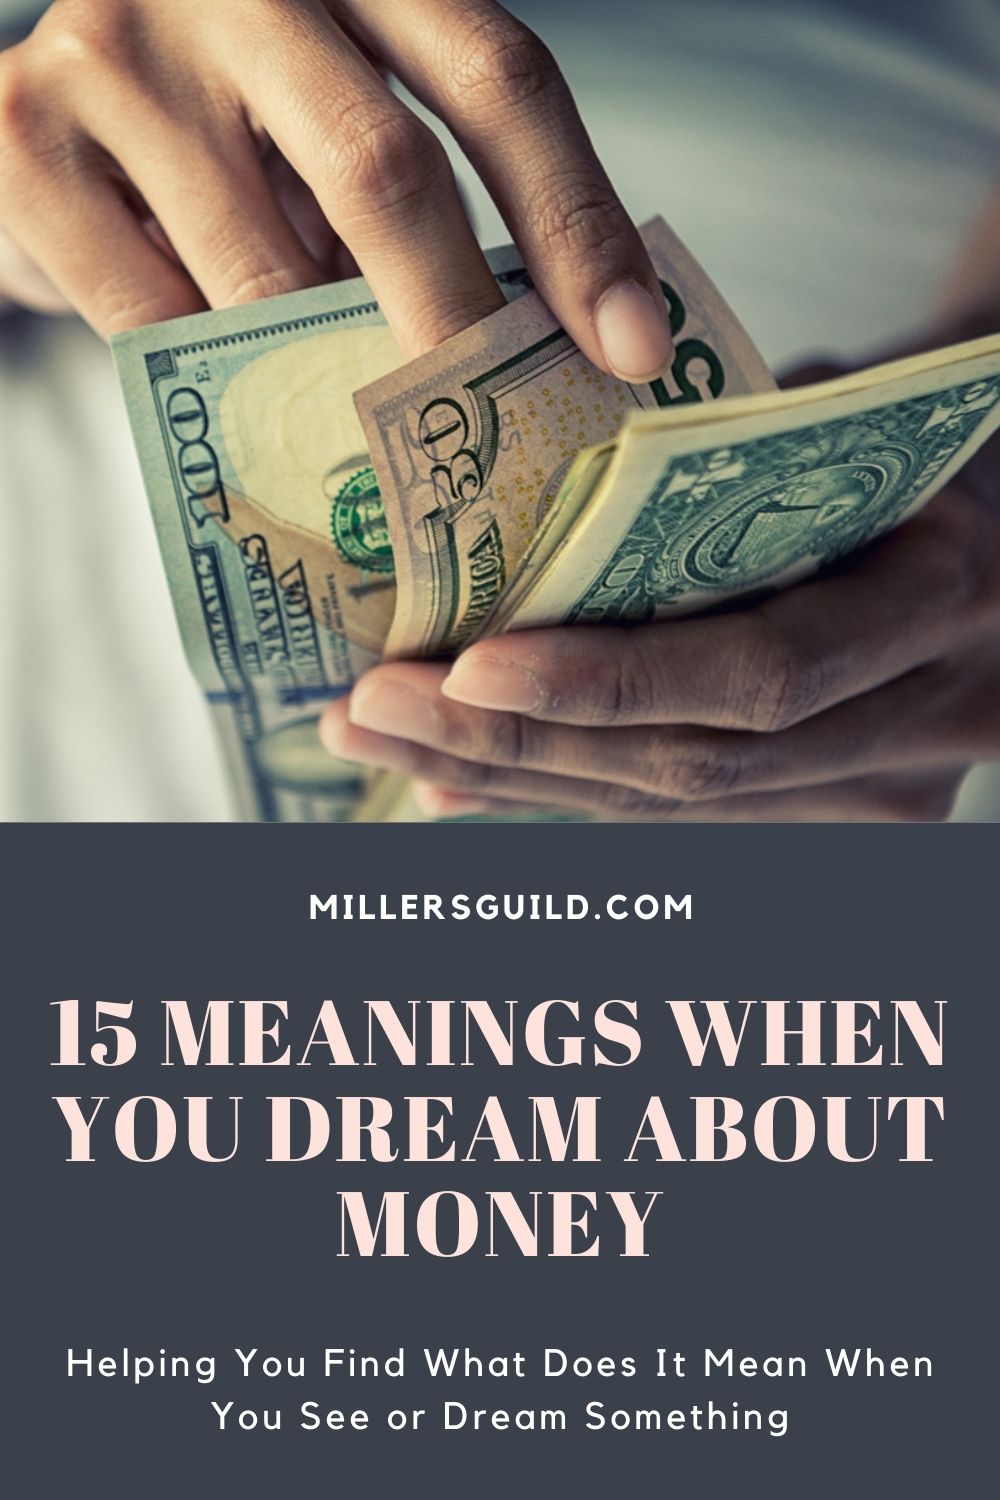 Dreams Symbolism Connected To Giving Money To Someone